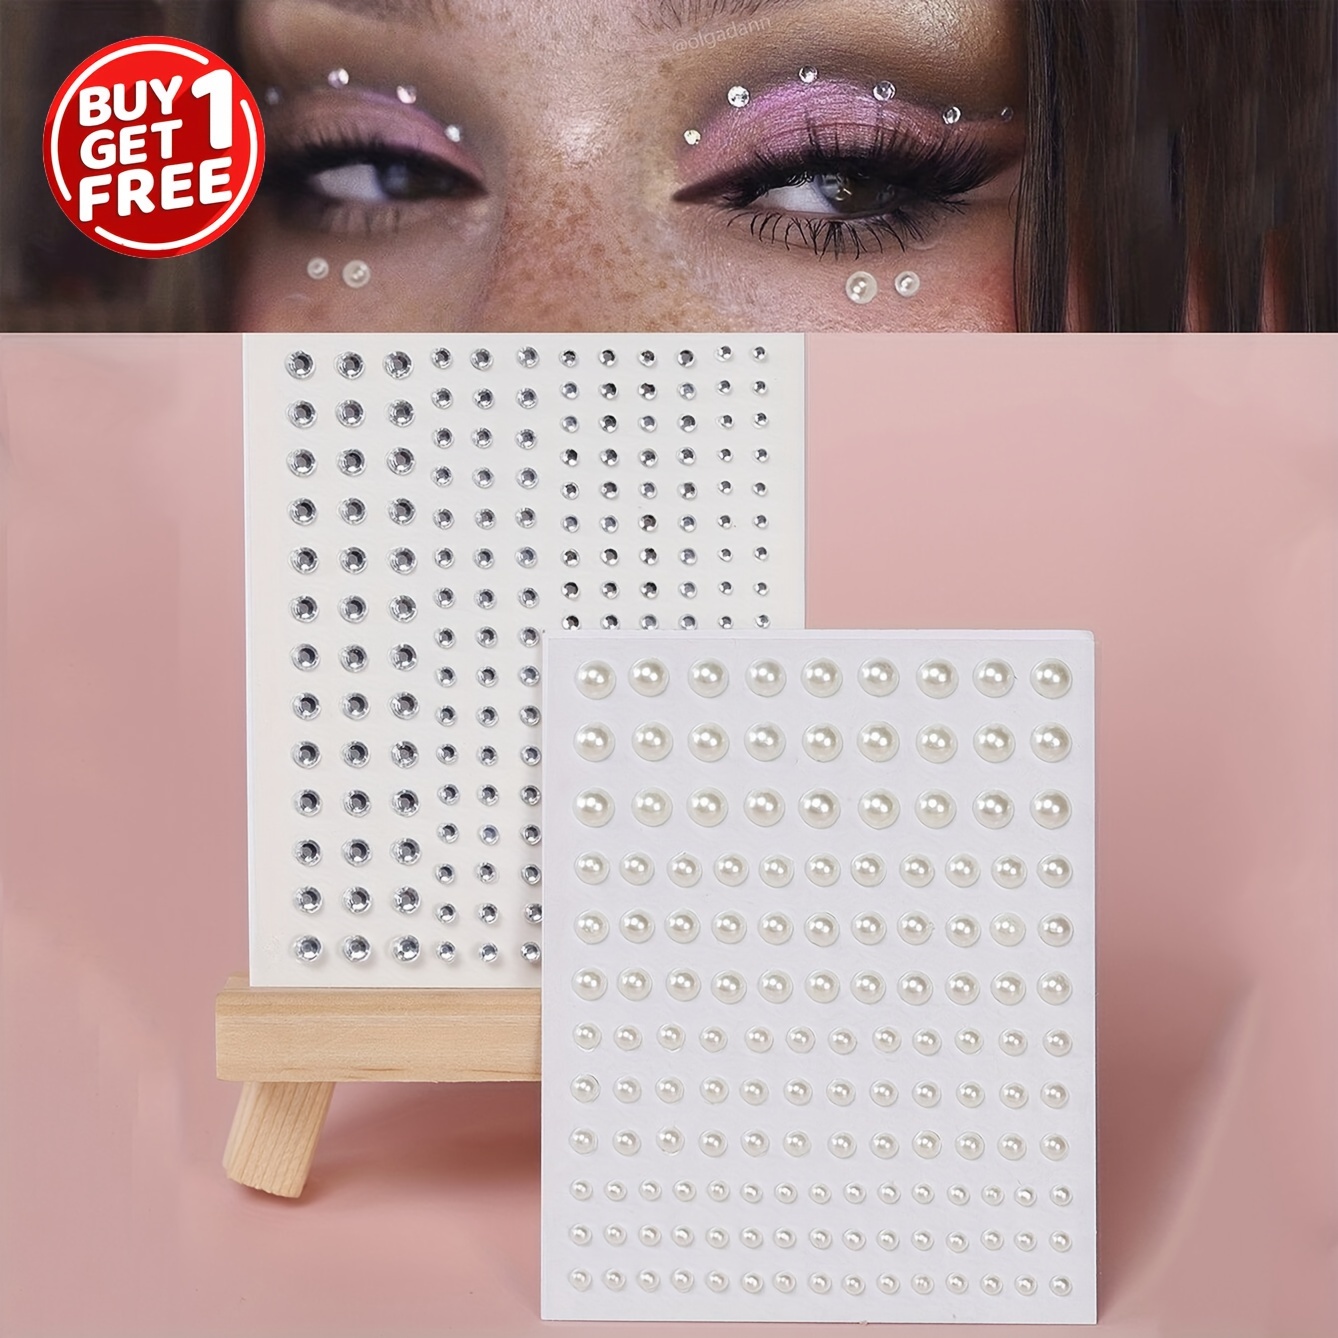 TureClos Eye Gems Rhinestone Stickers Self Adhesive No Glue Body Face  Makeup Jewelry DIY for Women Wedding Party Accessory Supplies HF-110 White  AB 